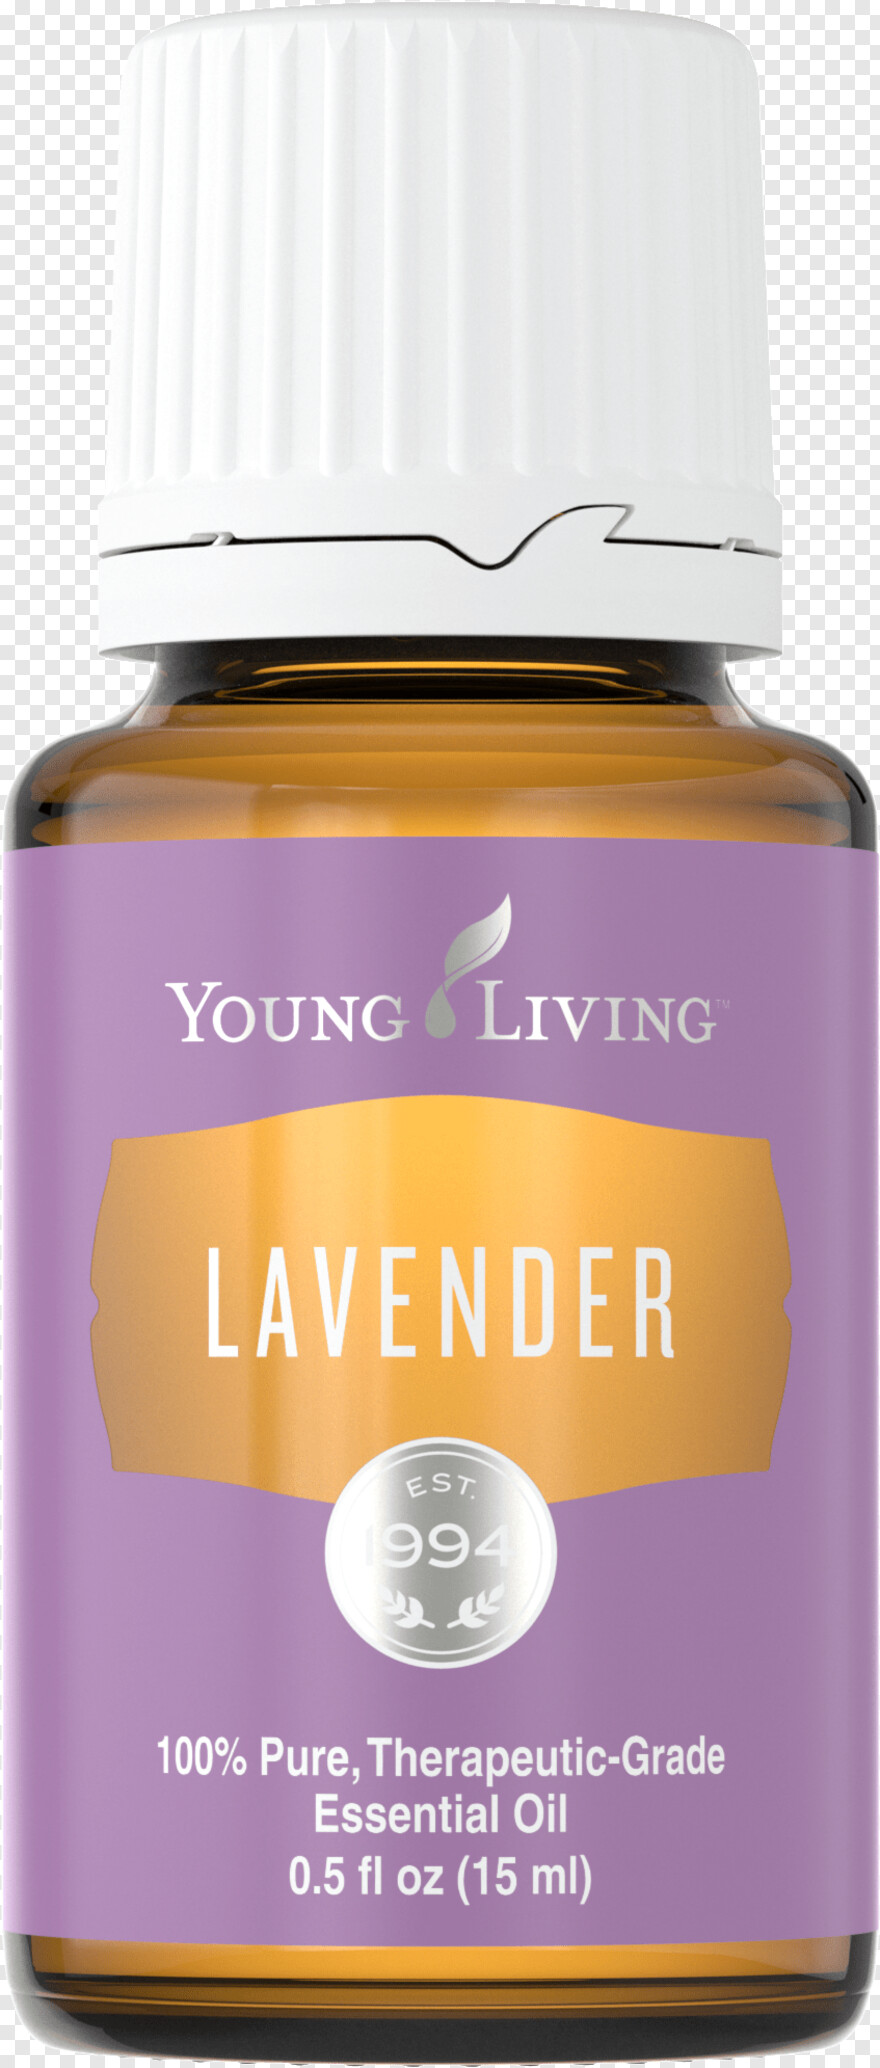 young-living-logo # 722718